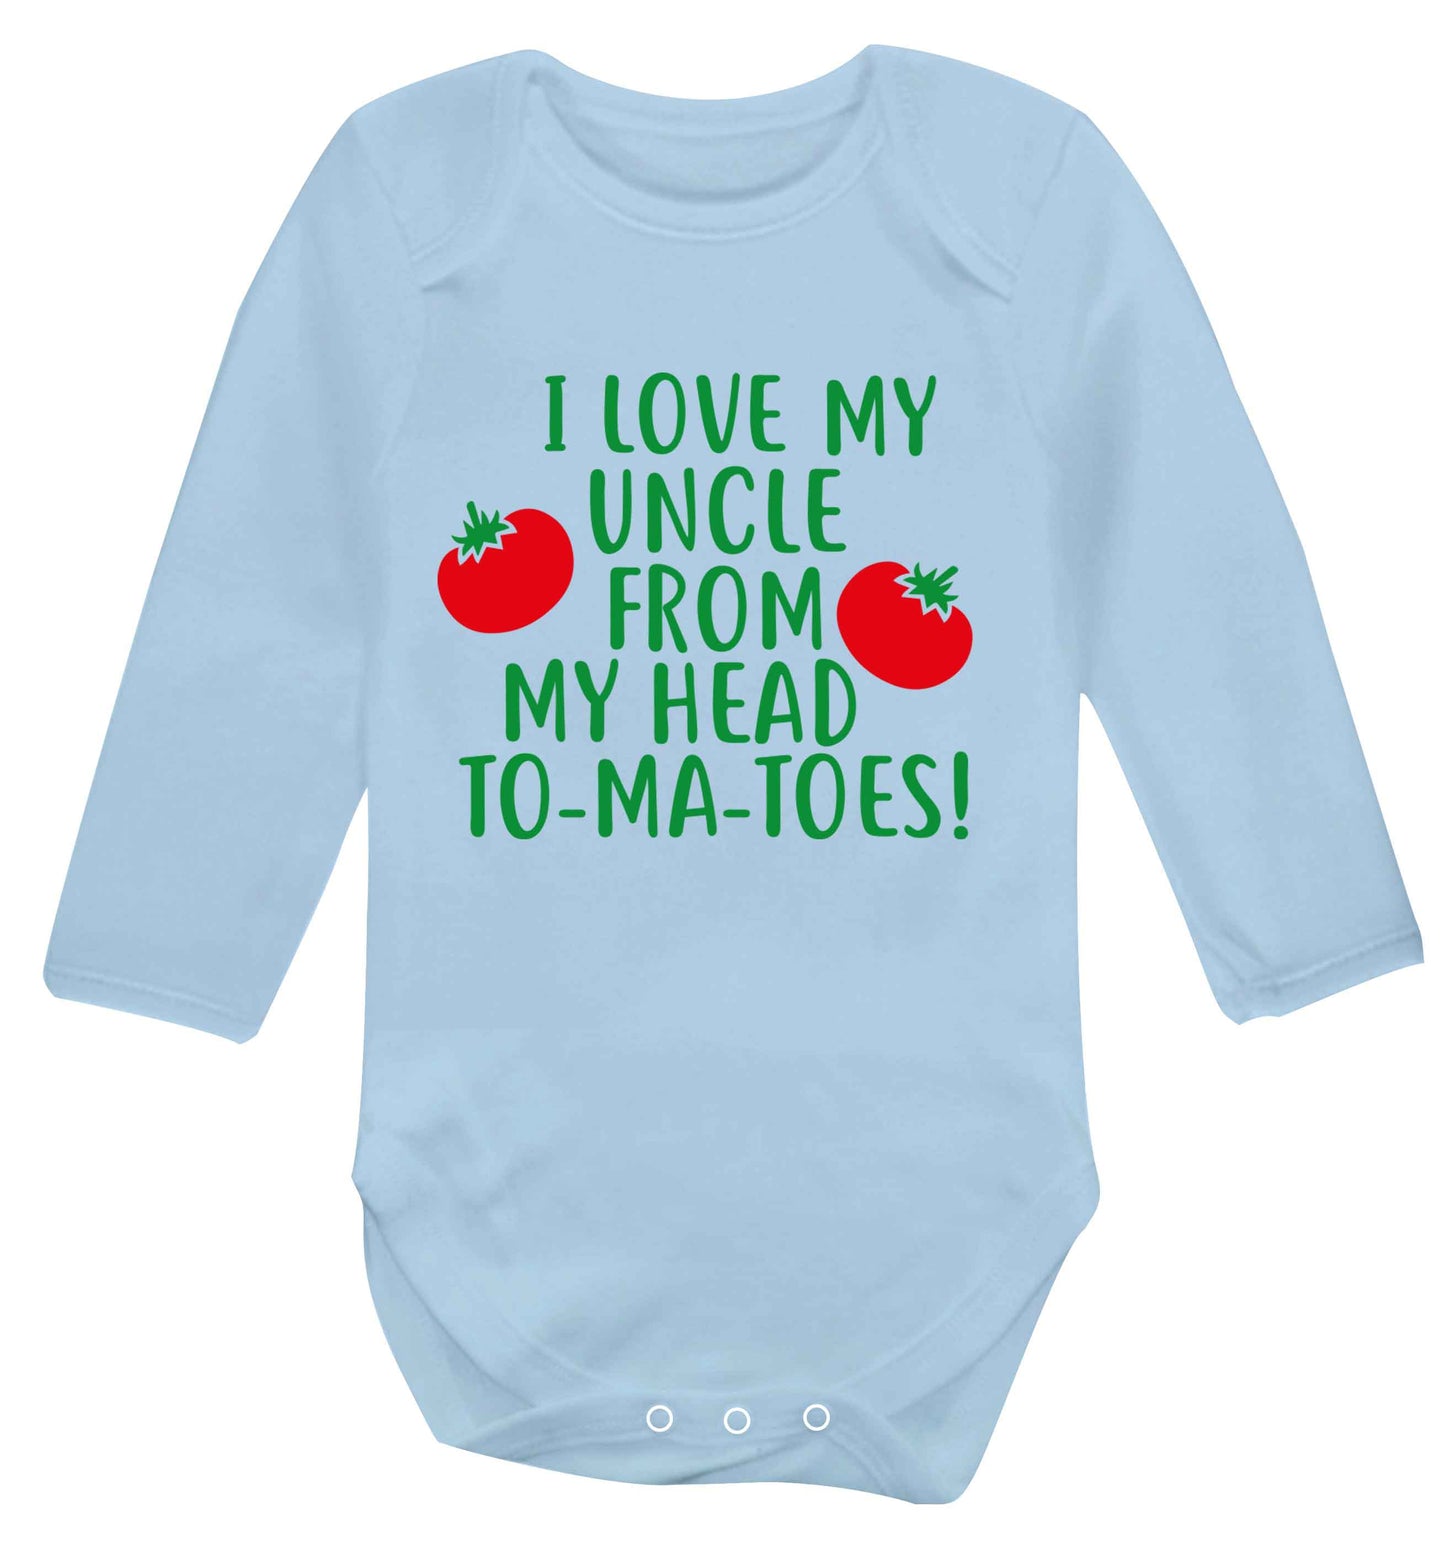 I love my uncle from my head To-Ma-Toes Baby Vest long sleeved pale blue 6-12 months